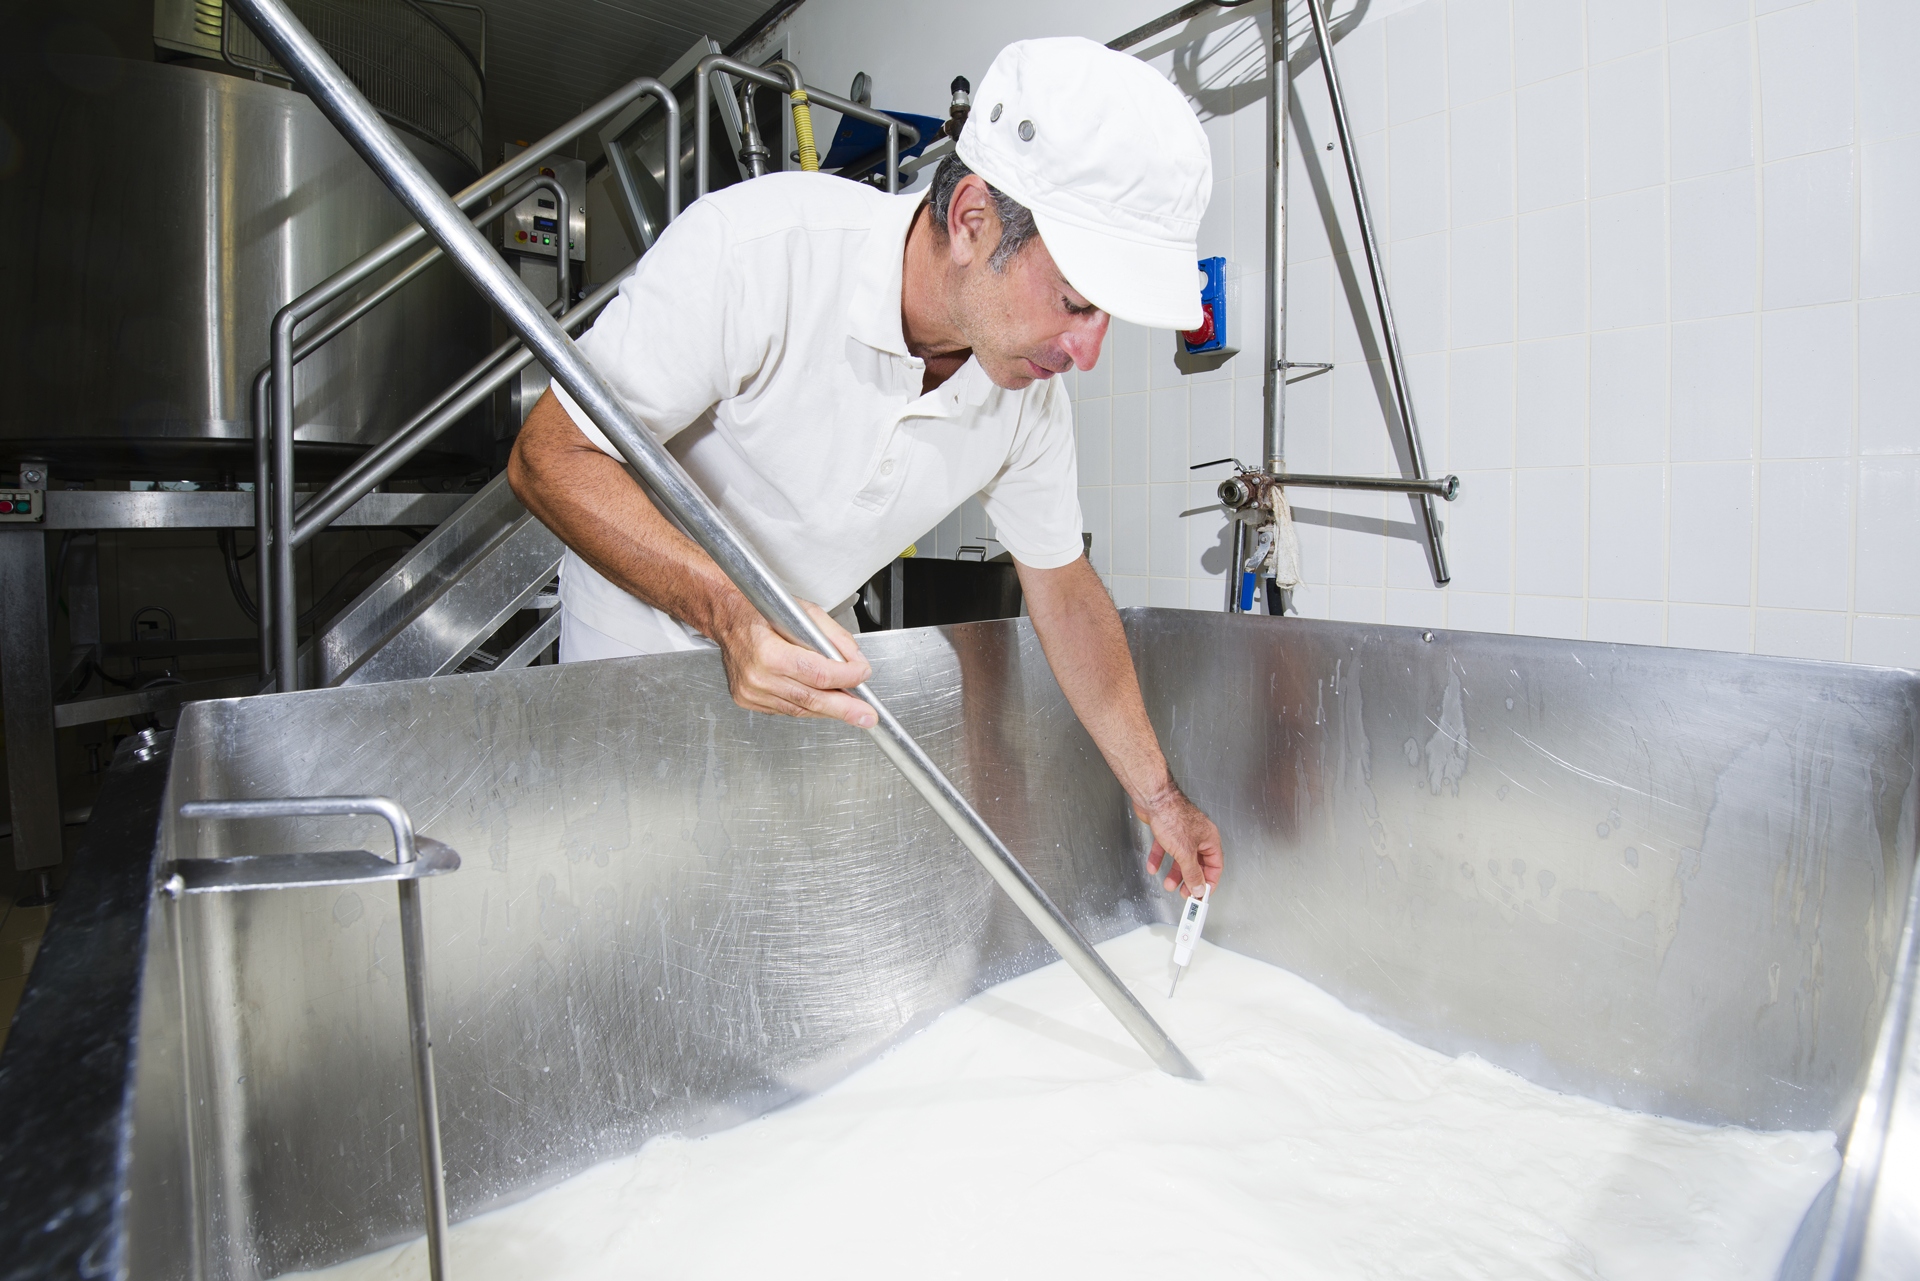 Cheesemaker measuring temperature using thermometer 